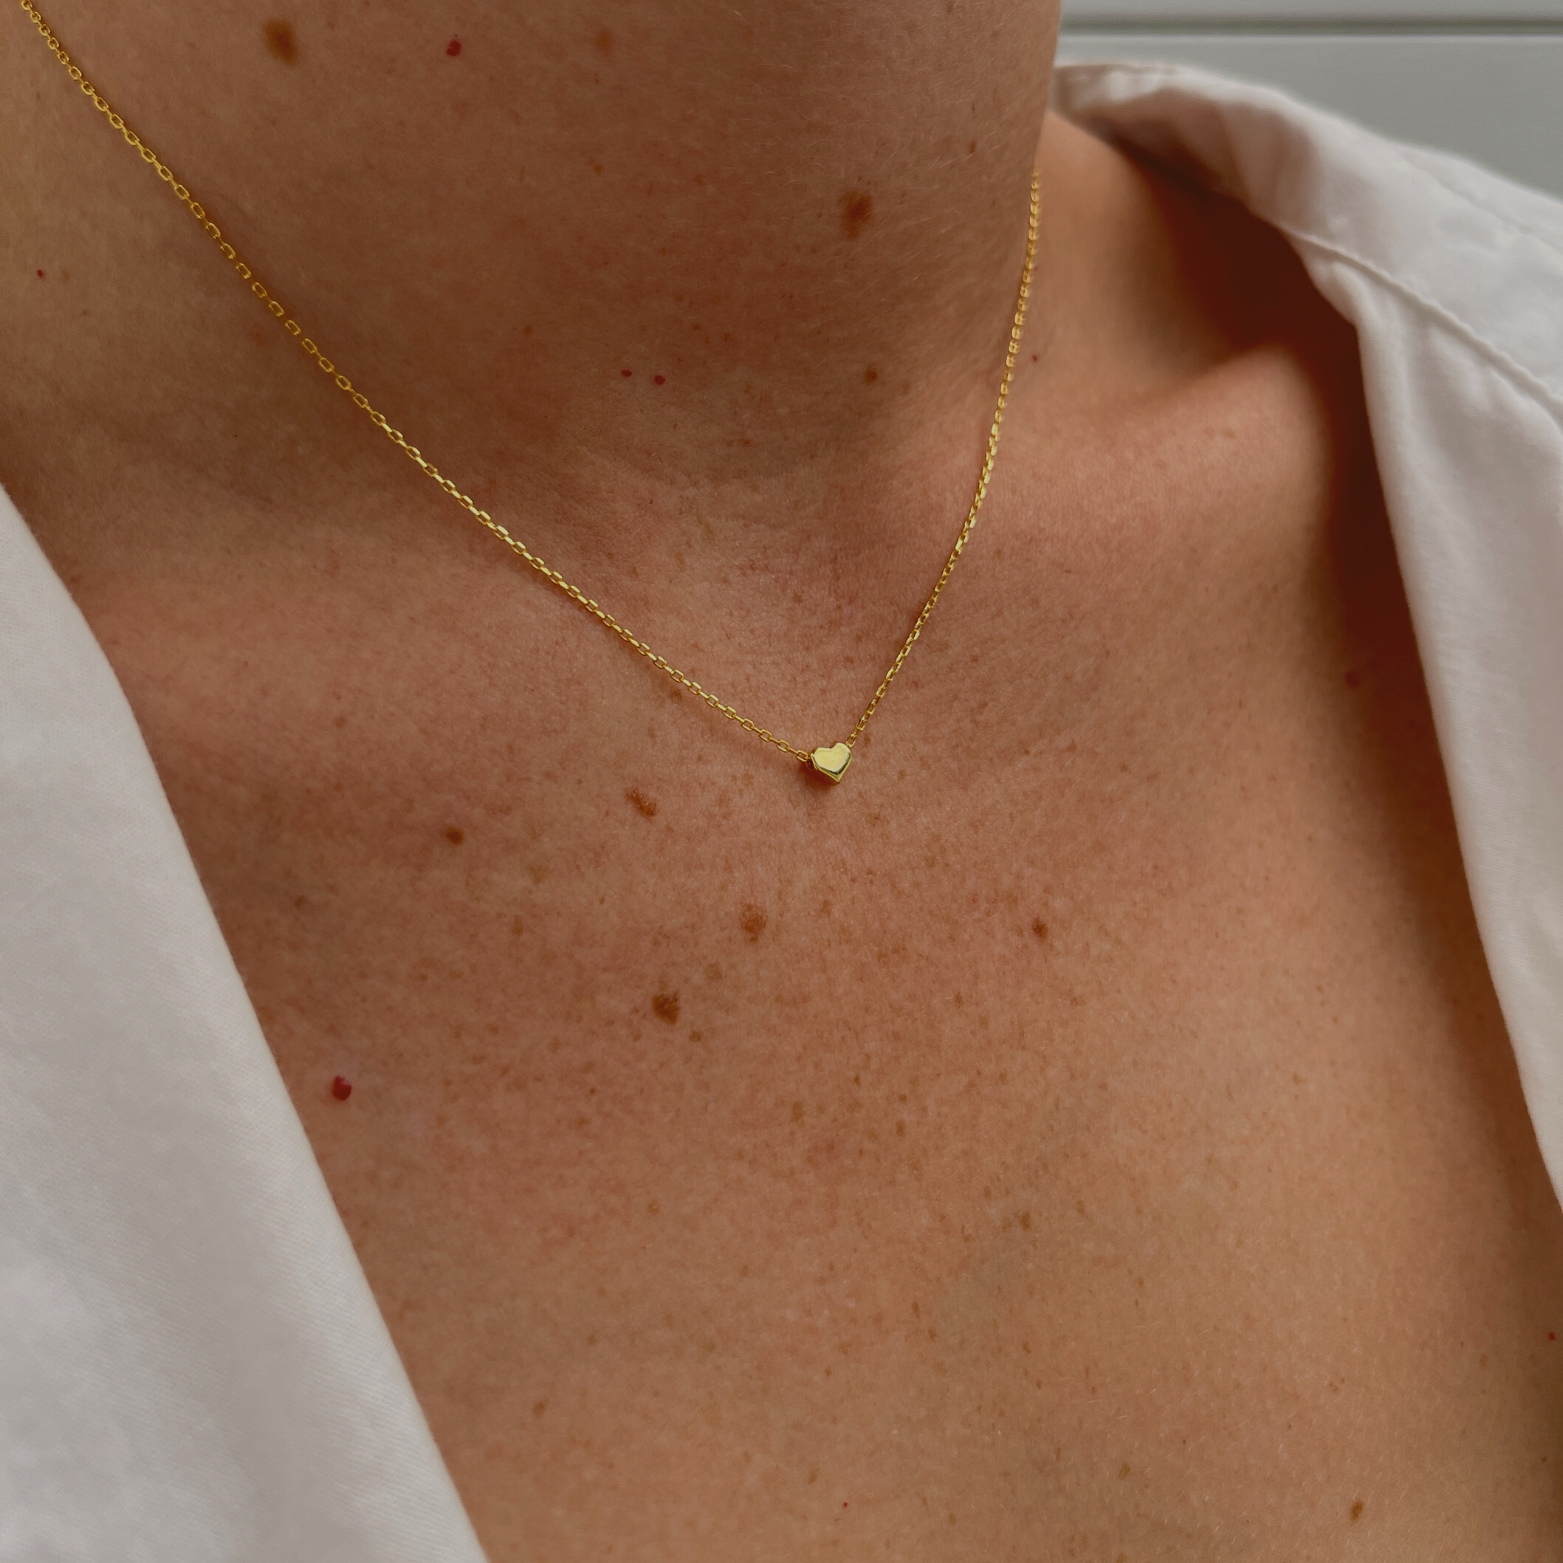 Woman adorned with the 'Amore' necklace featuring a 14K gold-plated heart pendant